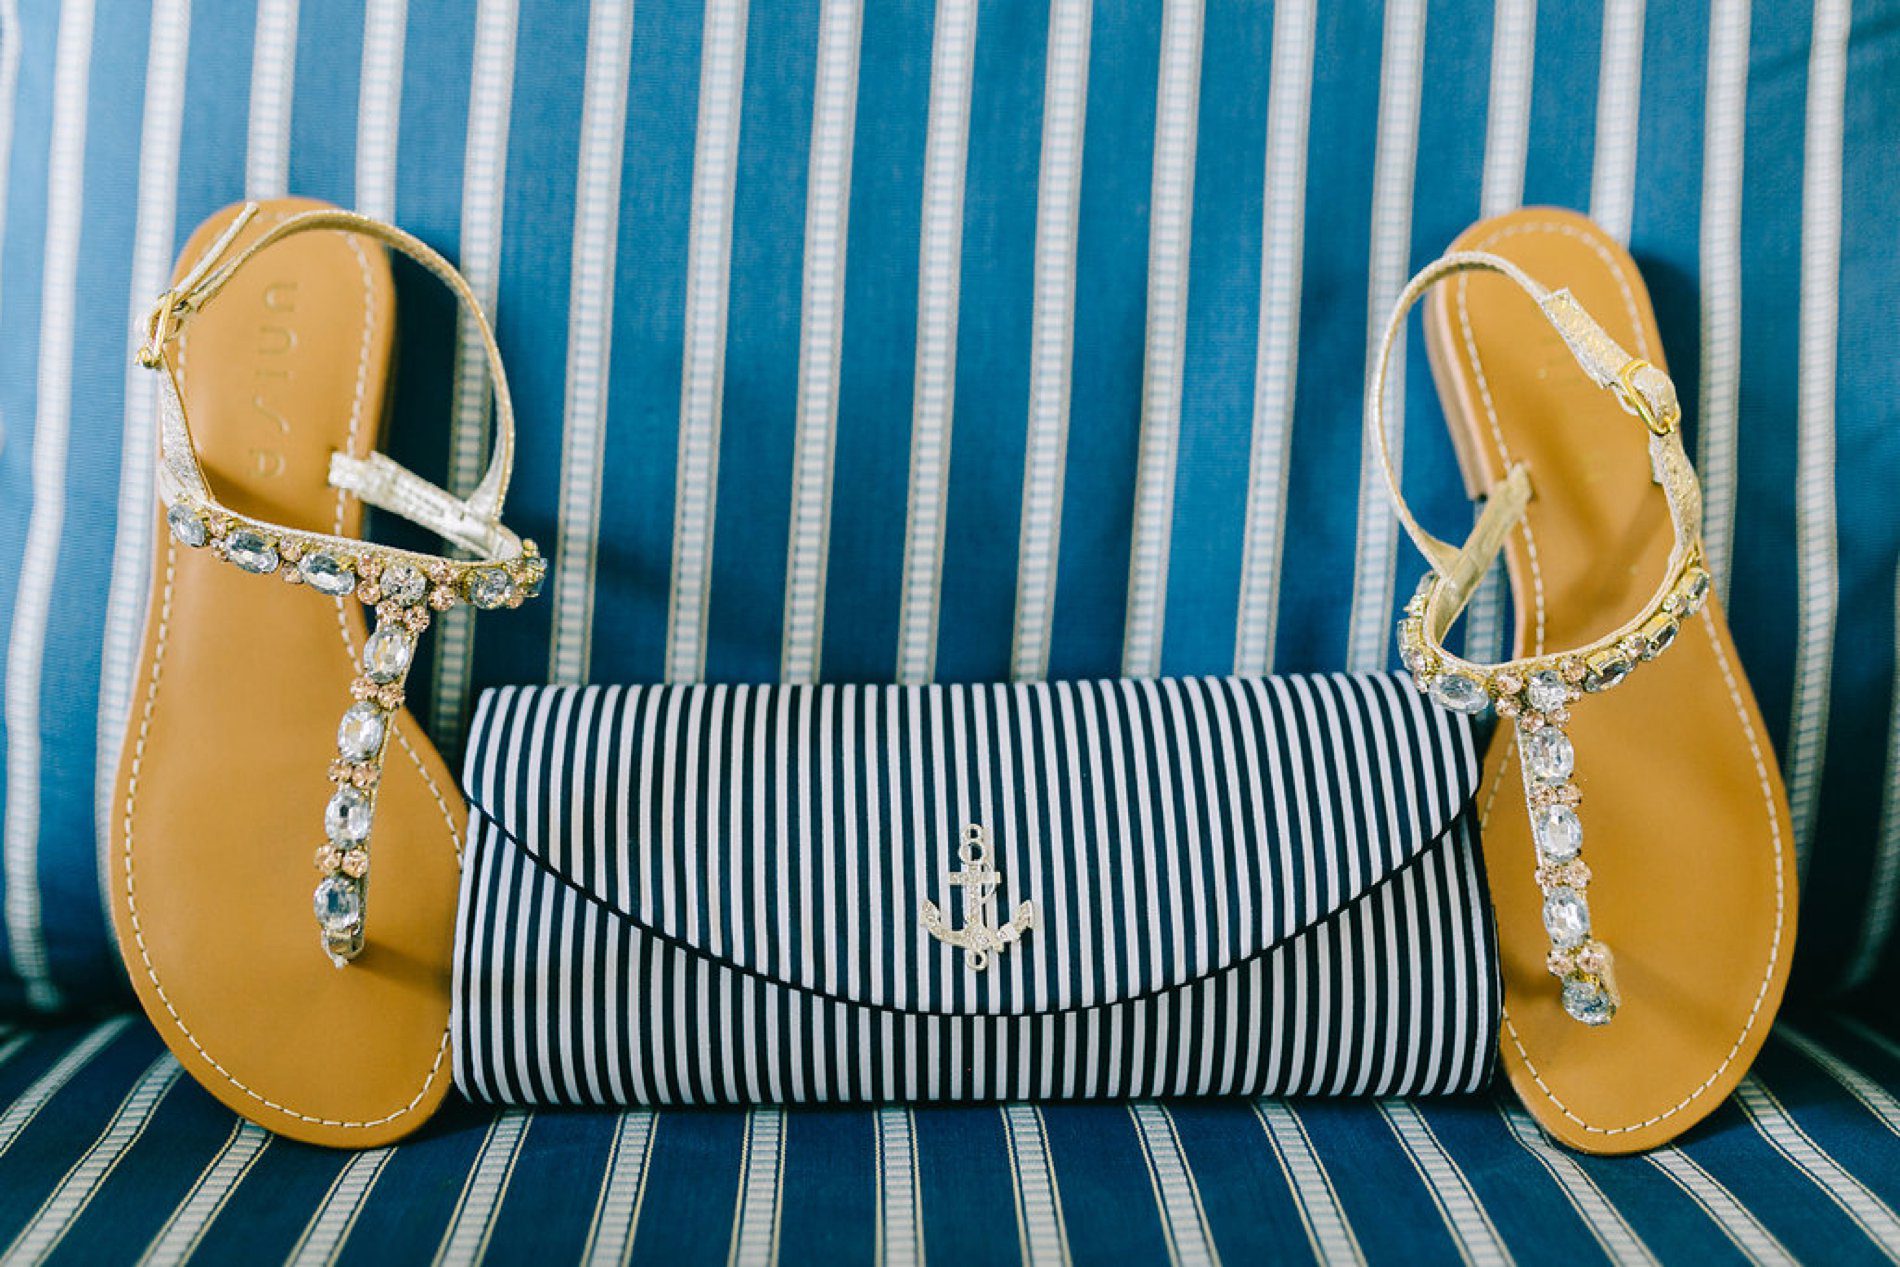 Brides jeweled sandals and striped nautical clutch